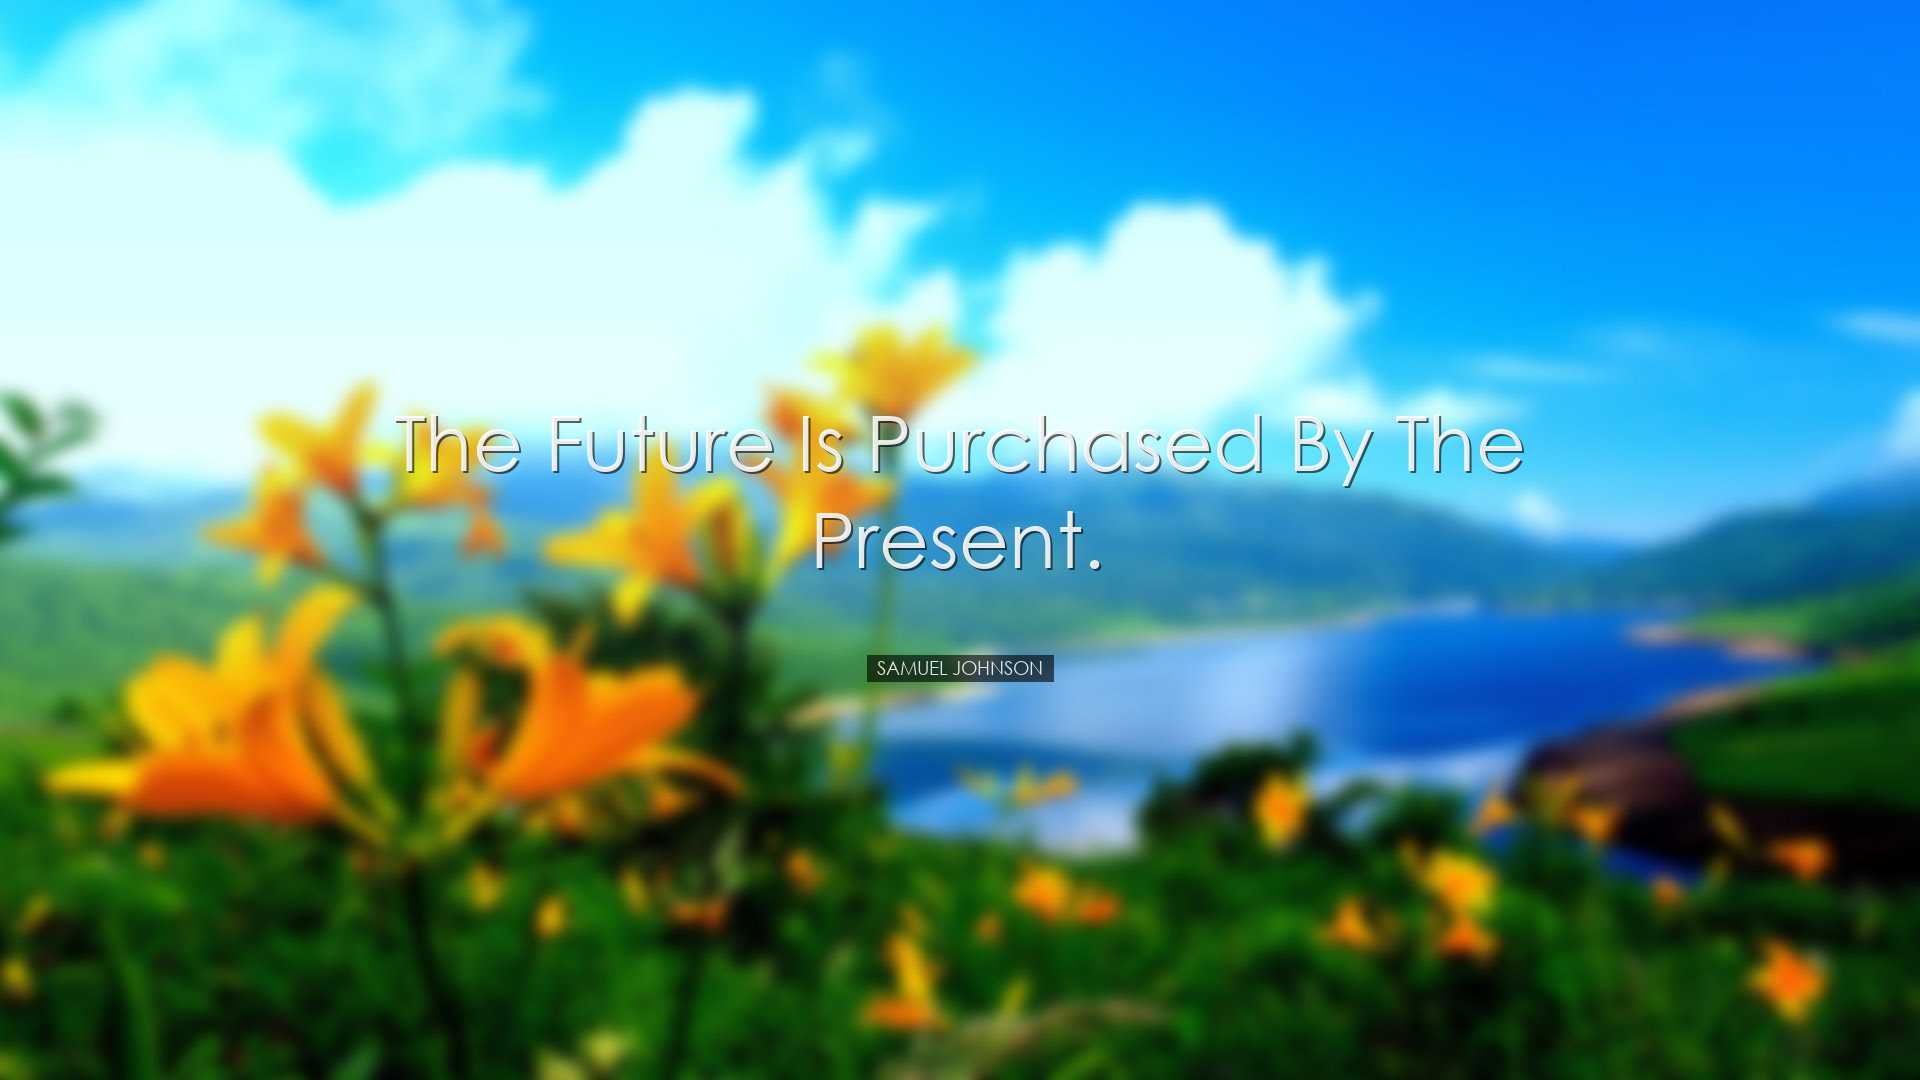 The future is purchased by the present. - Samuel Johnson